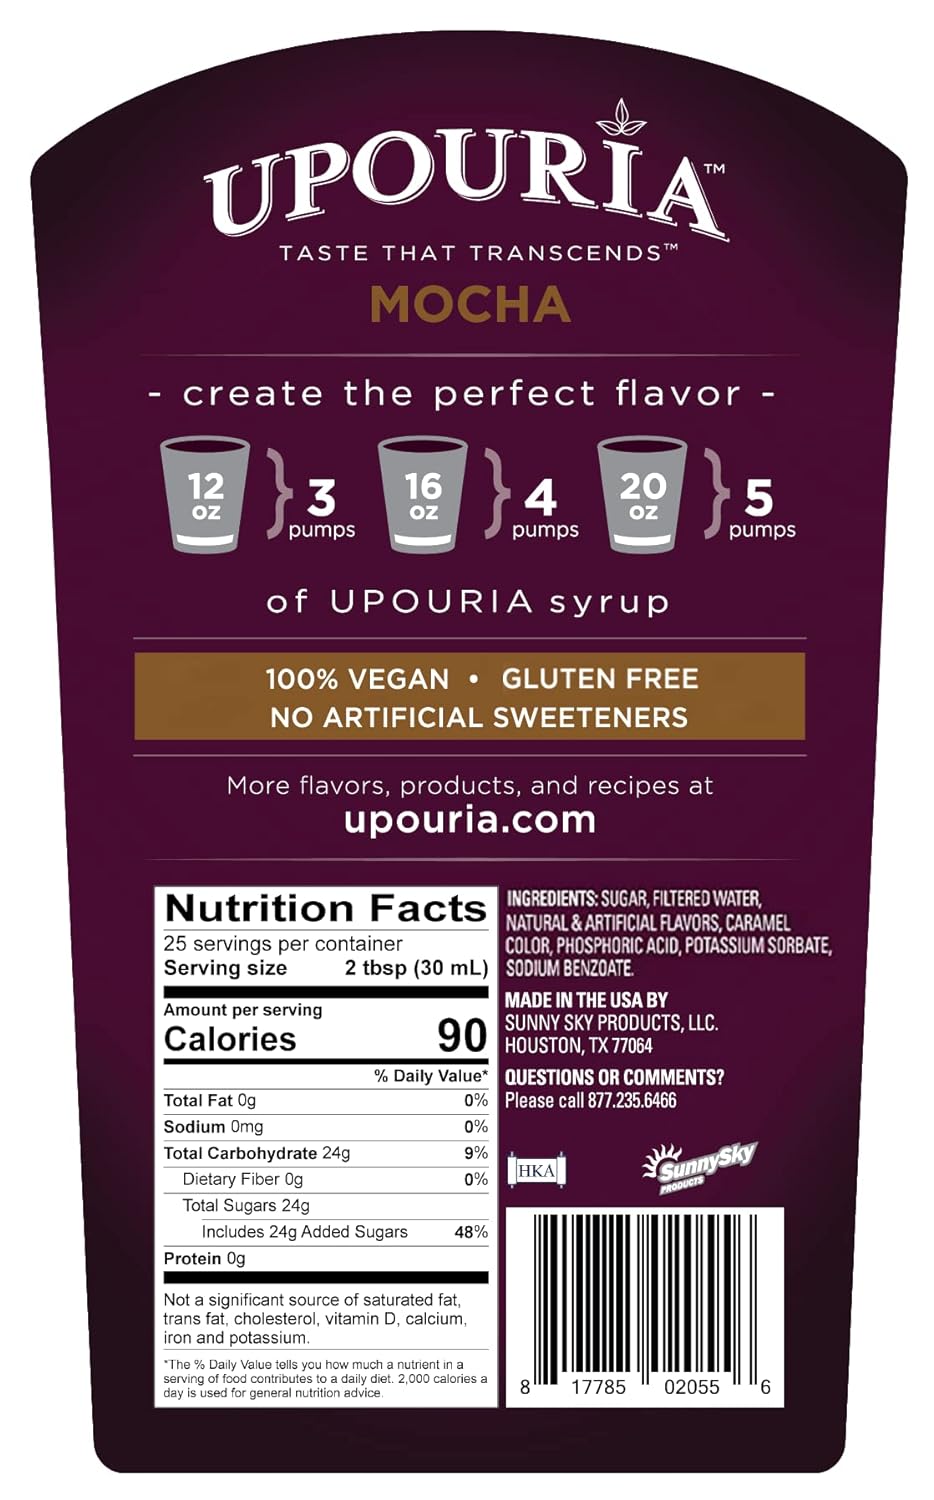 Upouria Mocha Coffee Syrup Flavoring, 100% Vegan, Gluten Free, Kosher, 750 mL Bottle - Pump Sold Separately : Grocery & Gourmet Food